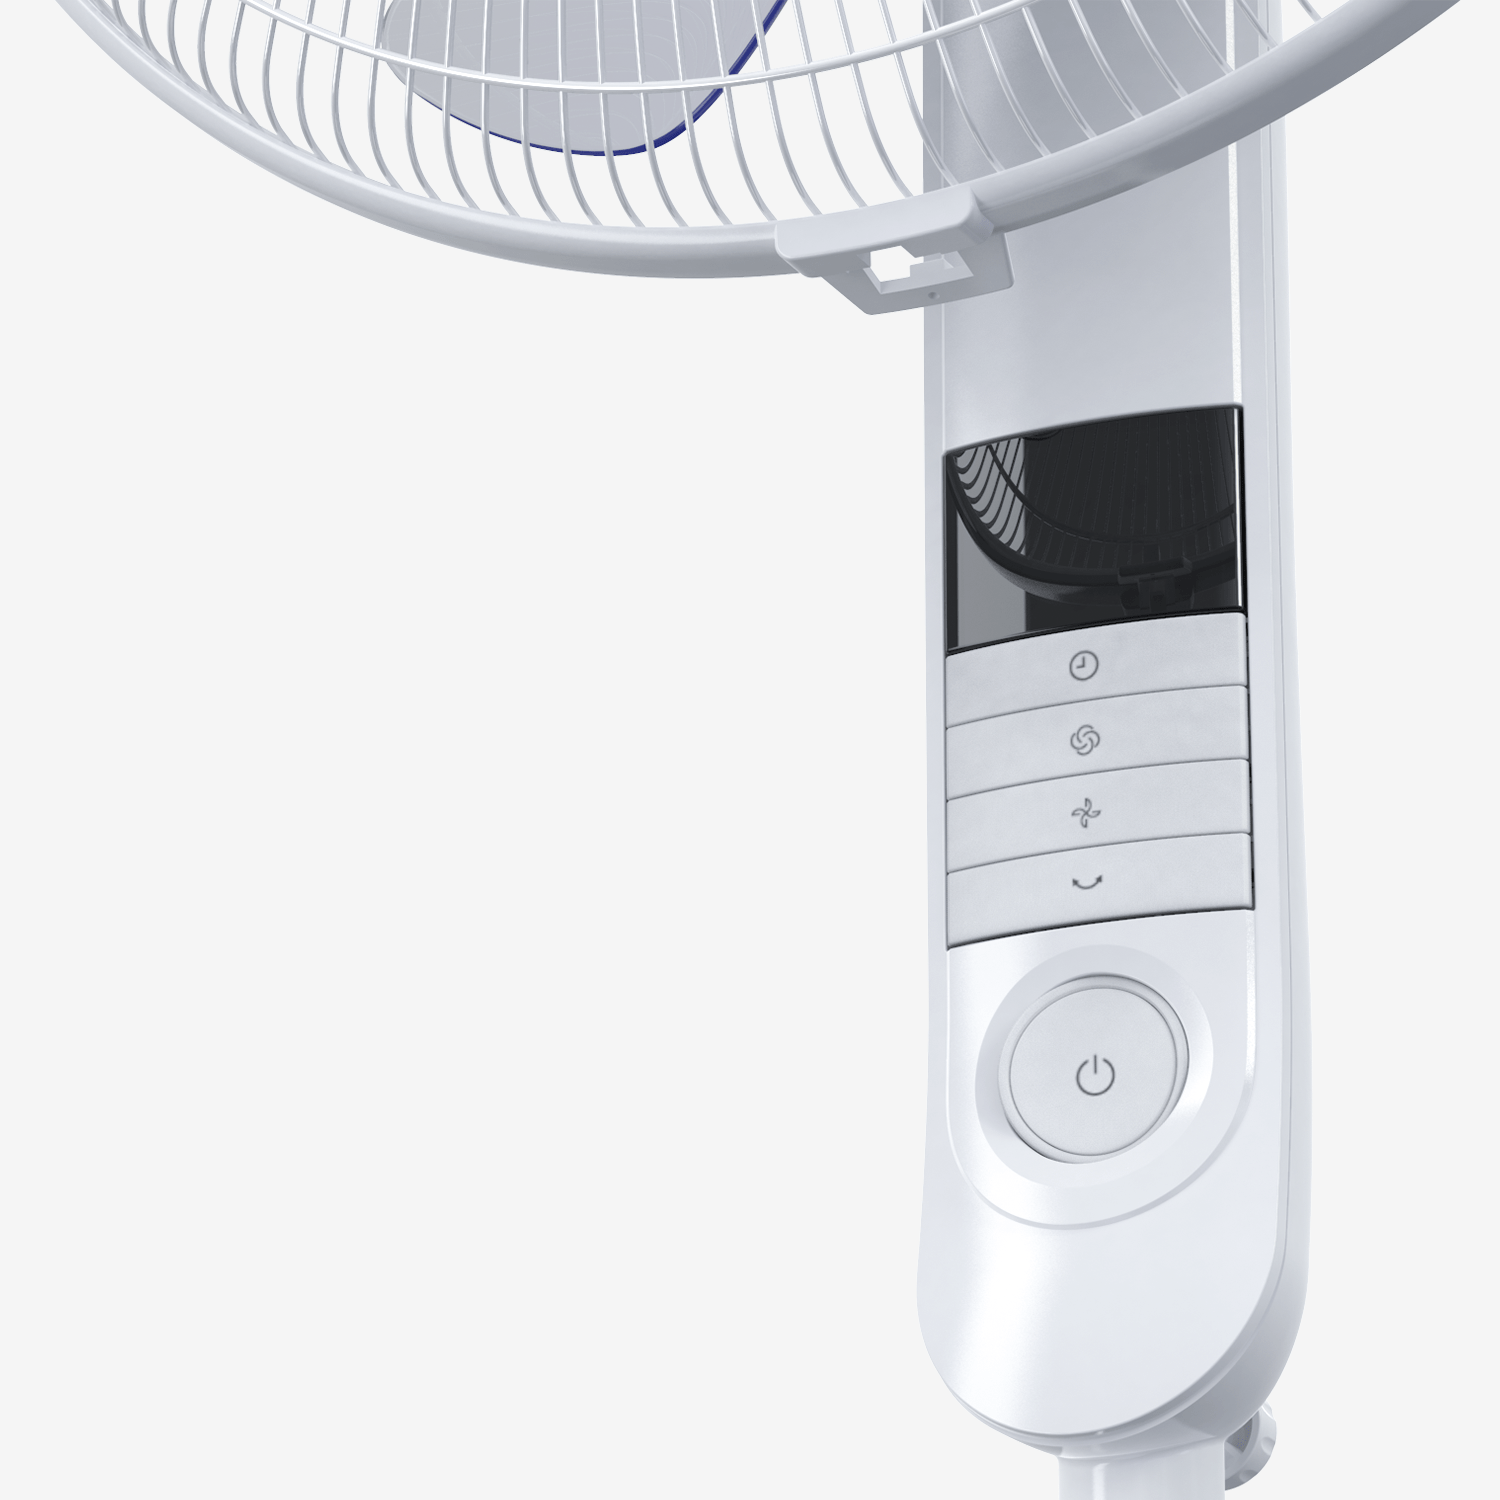 16" Pedestal Fan with 4 Fan Modes and Remote Control - White